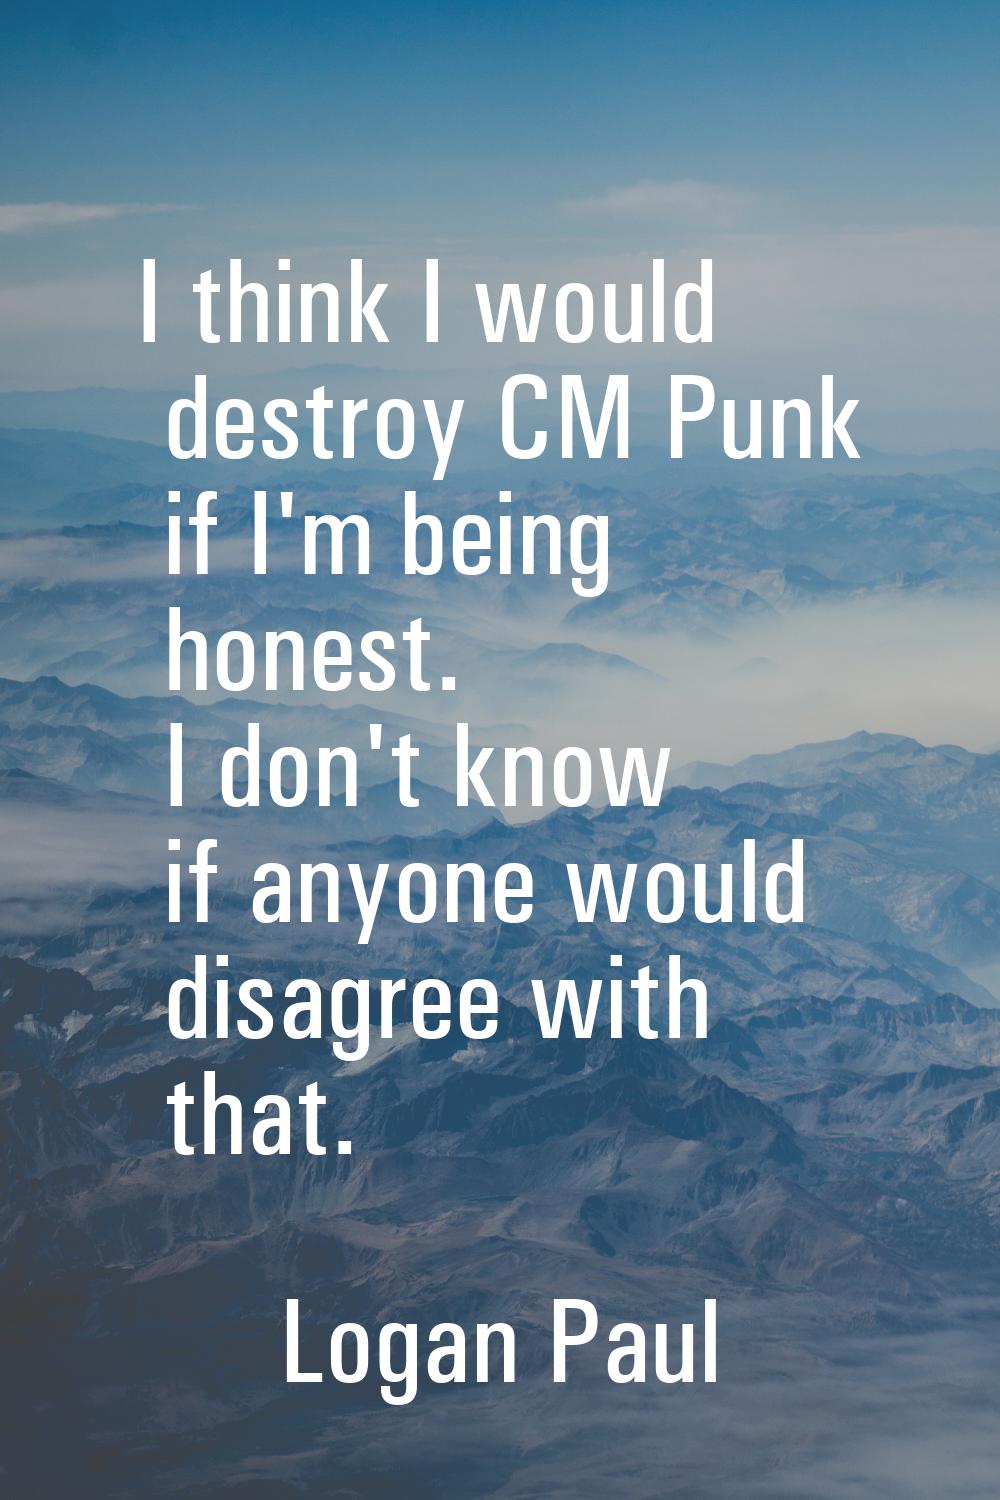 I think I would destroy CM Punk if I'm being honest. I don't know if anyone would disagree with tha